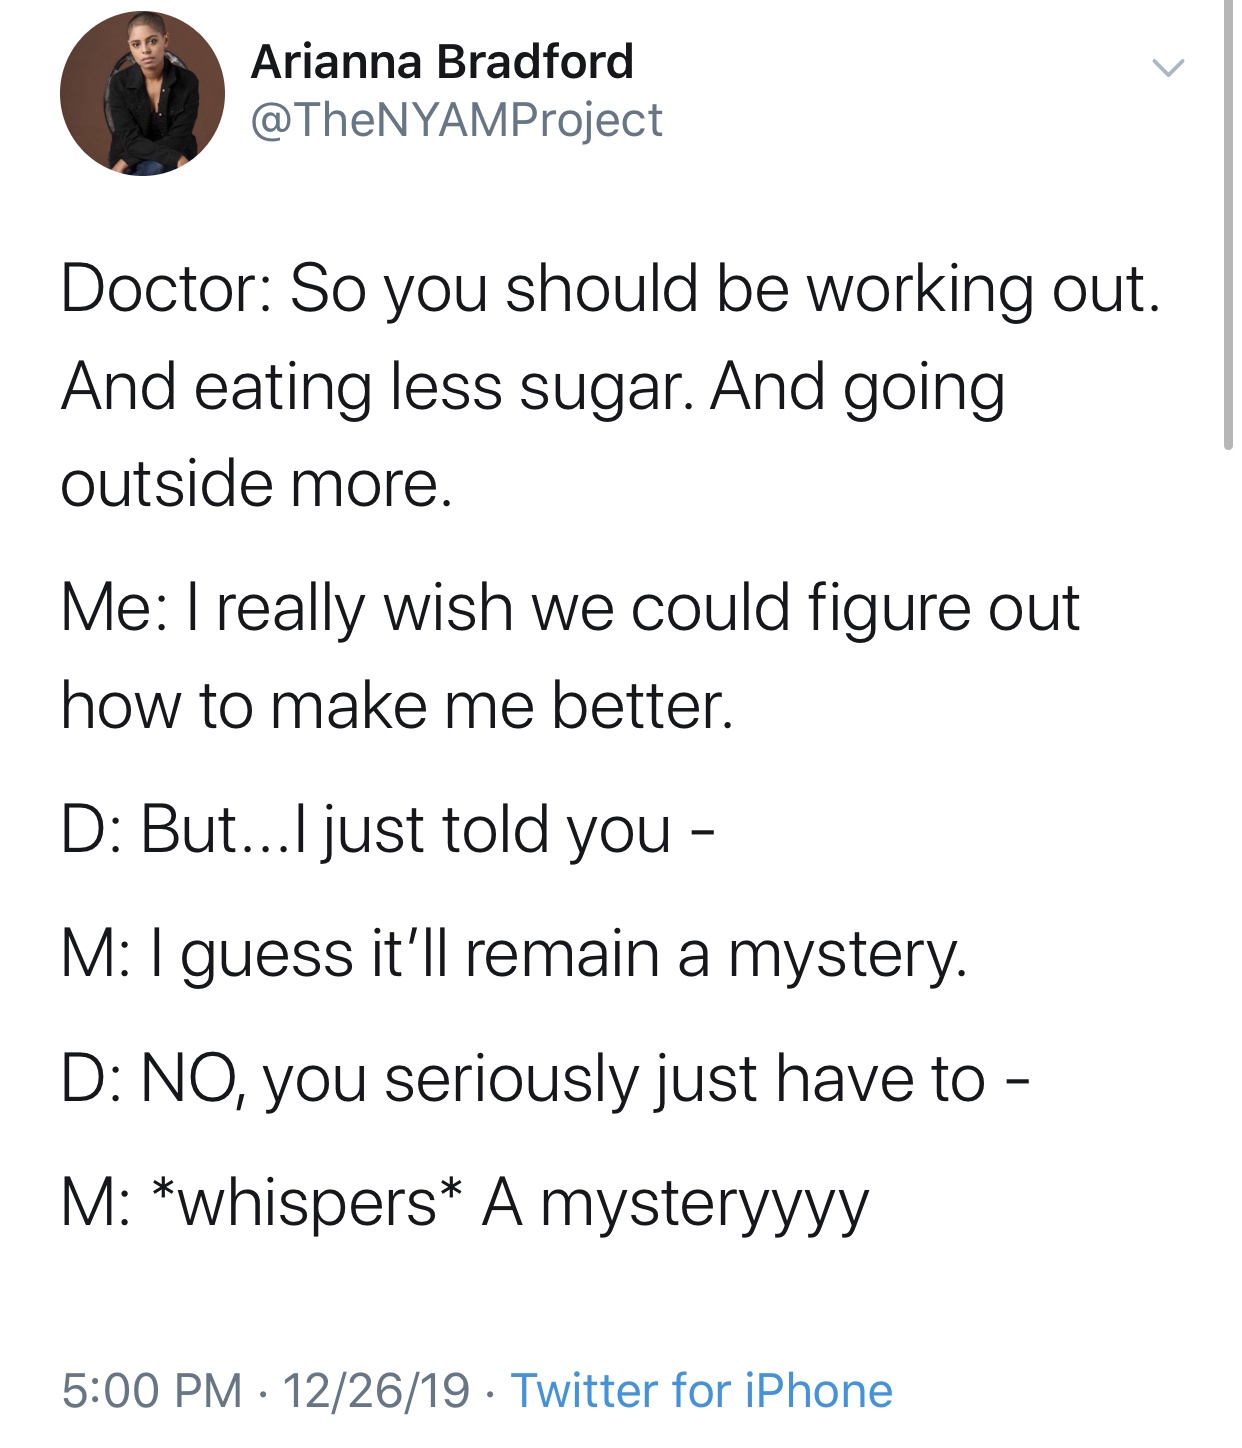 JPEG - Arianna Bradford Doctor So you should be working out. And eating less sugar. And going outside more. Me I really wish we could figure out how to make me better. D But...I just told you MI guess it'll remain a mystery. D No, you seriously just have 